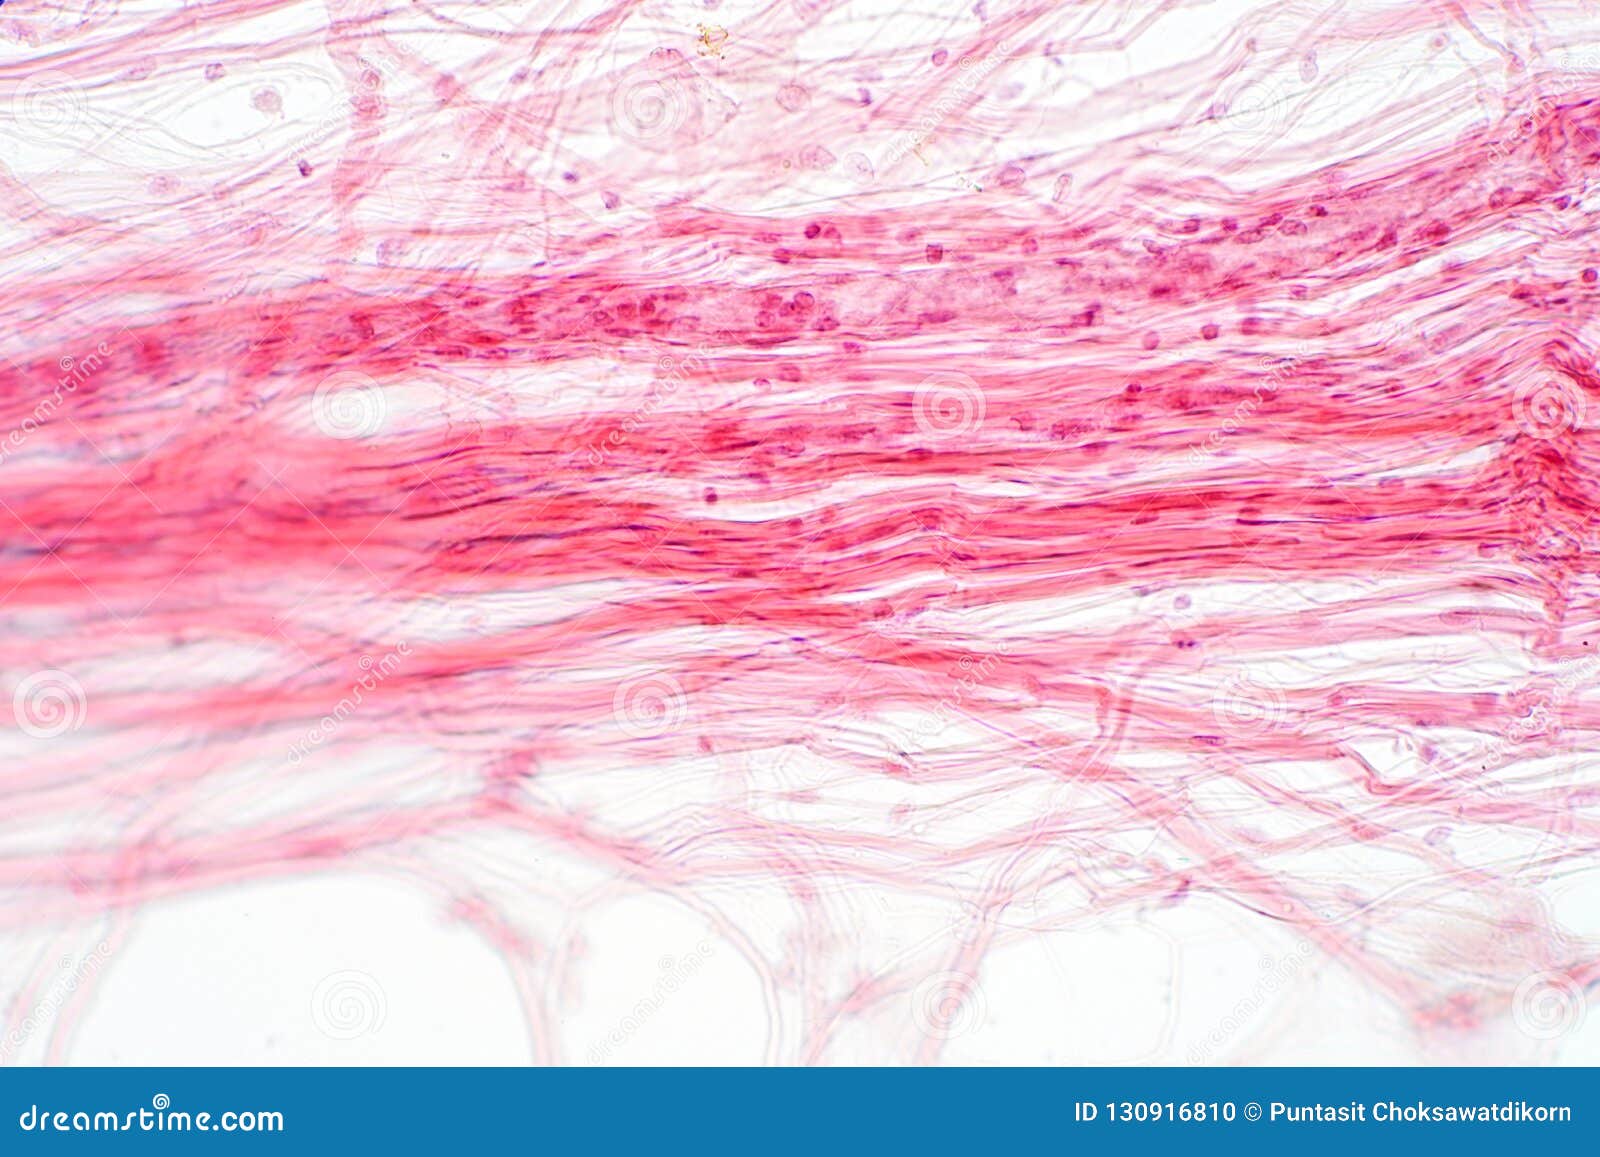 areolar connective tissue under the microscope view.